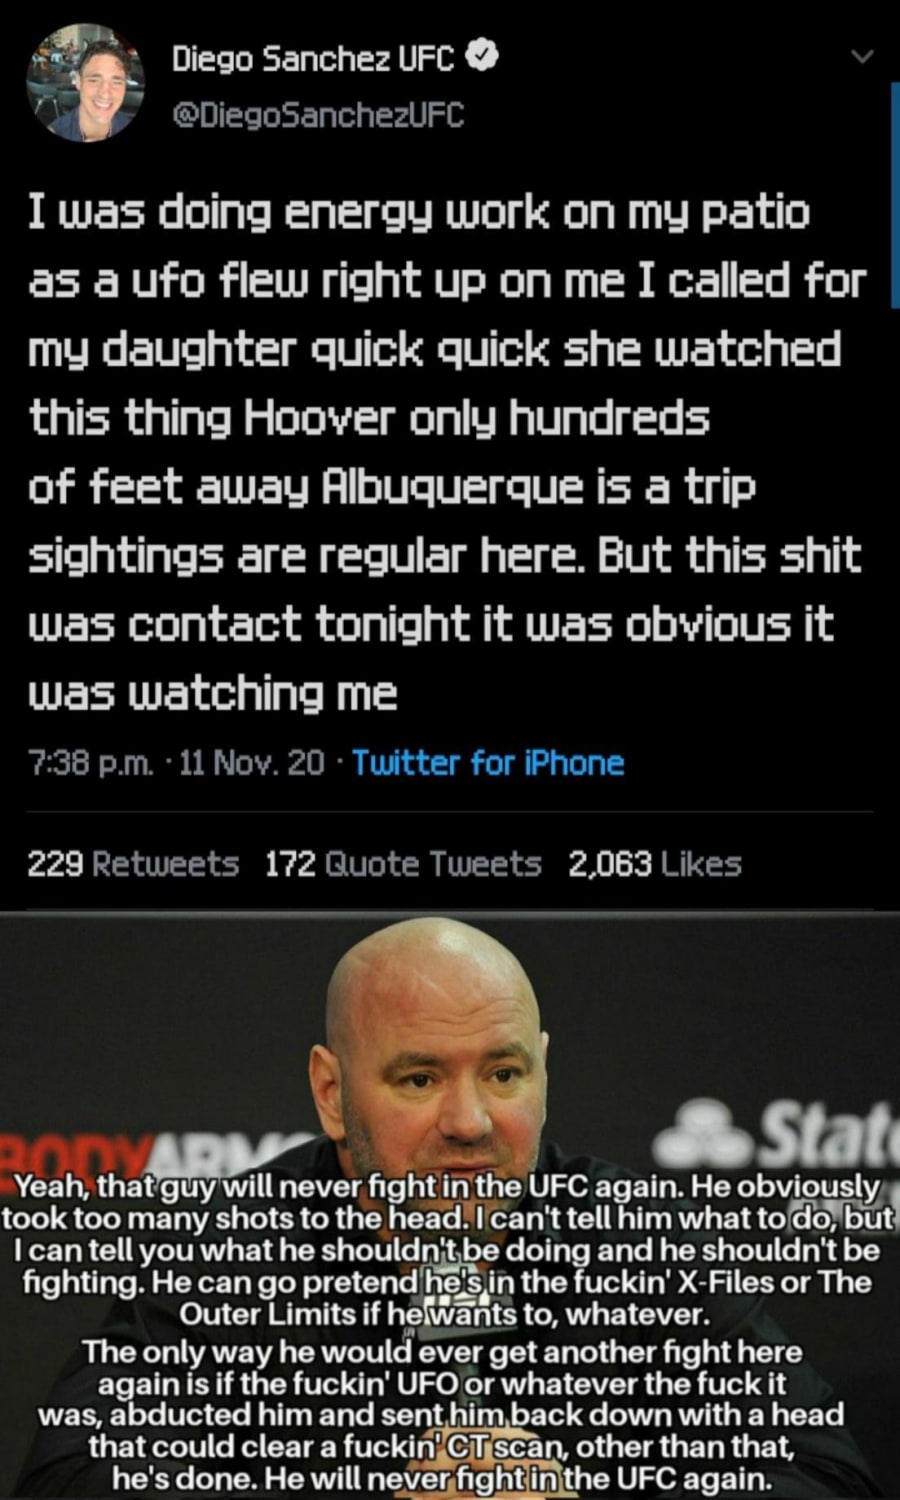 Diego Sanchez tweets about being watched by a UFO, Dana White reacts "He will never fight in the UFC again"